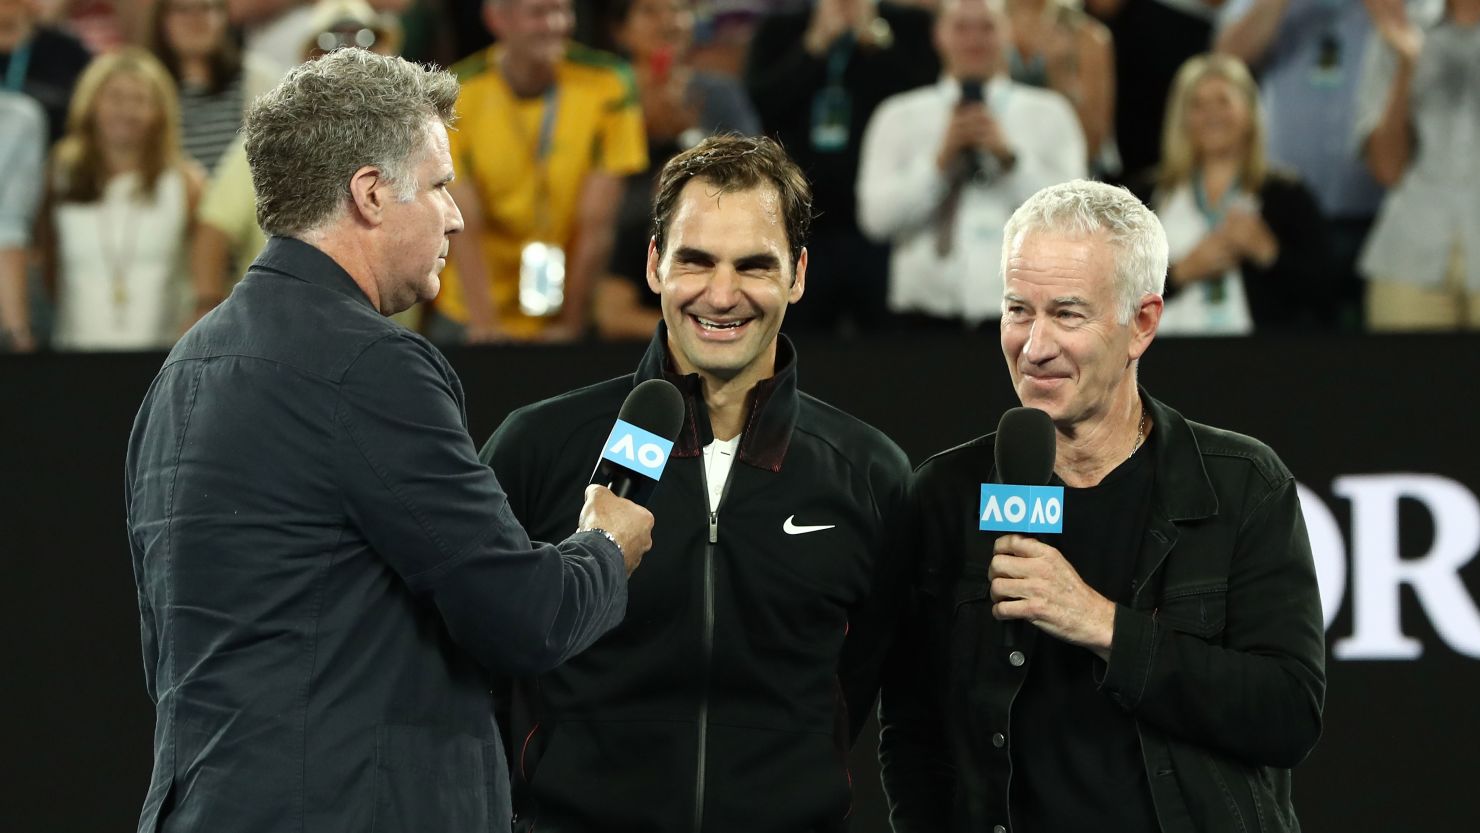 MELBOURNE, AUSTRALIA - JANUARY 16:  Will Ferrell (L) and John McEnroe (R) interview Roger Federer of Switzerland after Federer won his first round match against Aljaz Bedene of Slovenia on day two of the 2018 Australian Open at Melbourne Park on January 16, 2018 in Melbourne, Australia.  (Photo by Ryan Pierse/Getty Images)